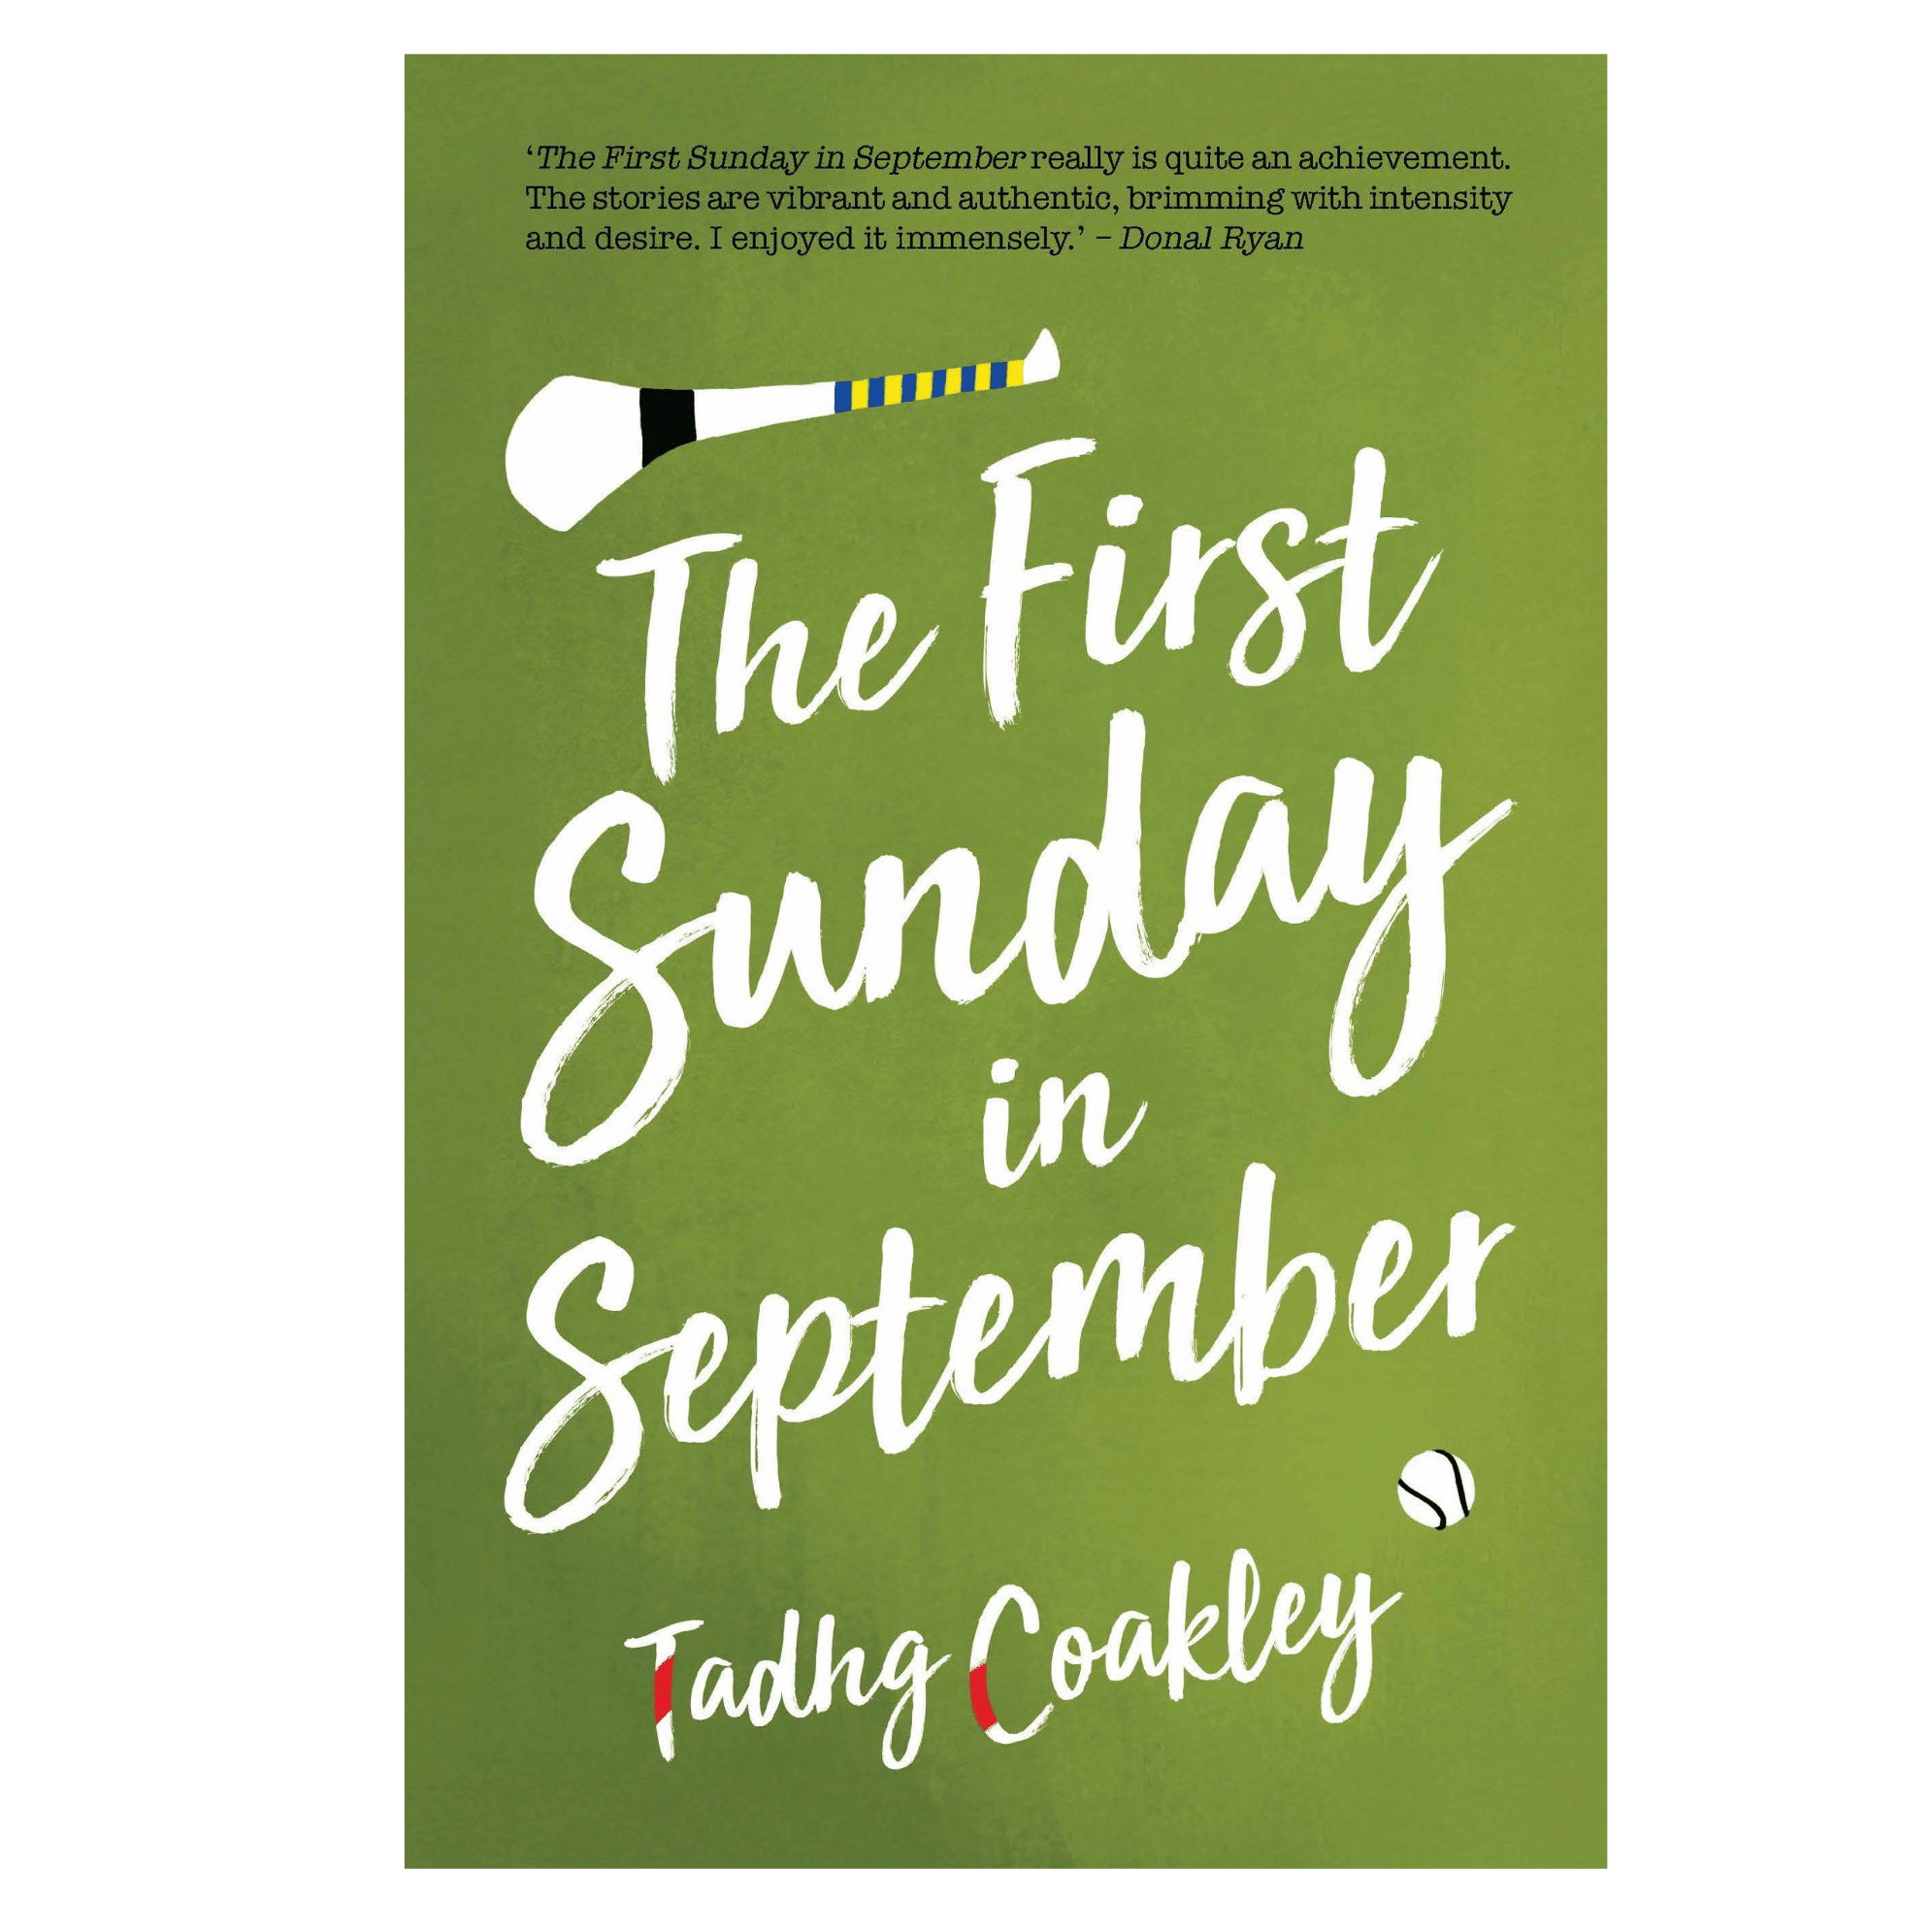 The First Sunday in September Front Cover 